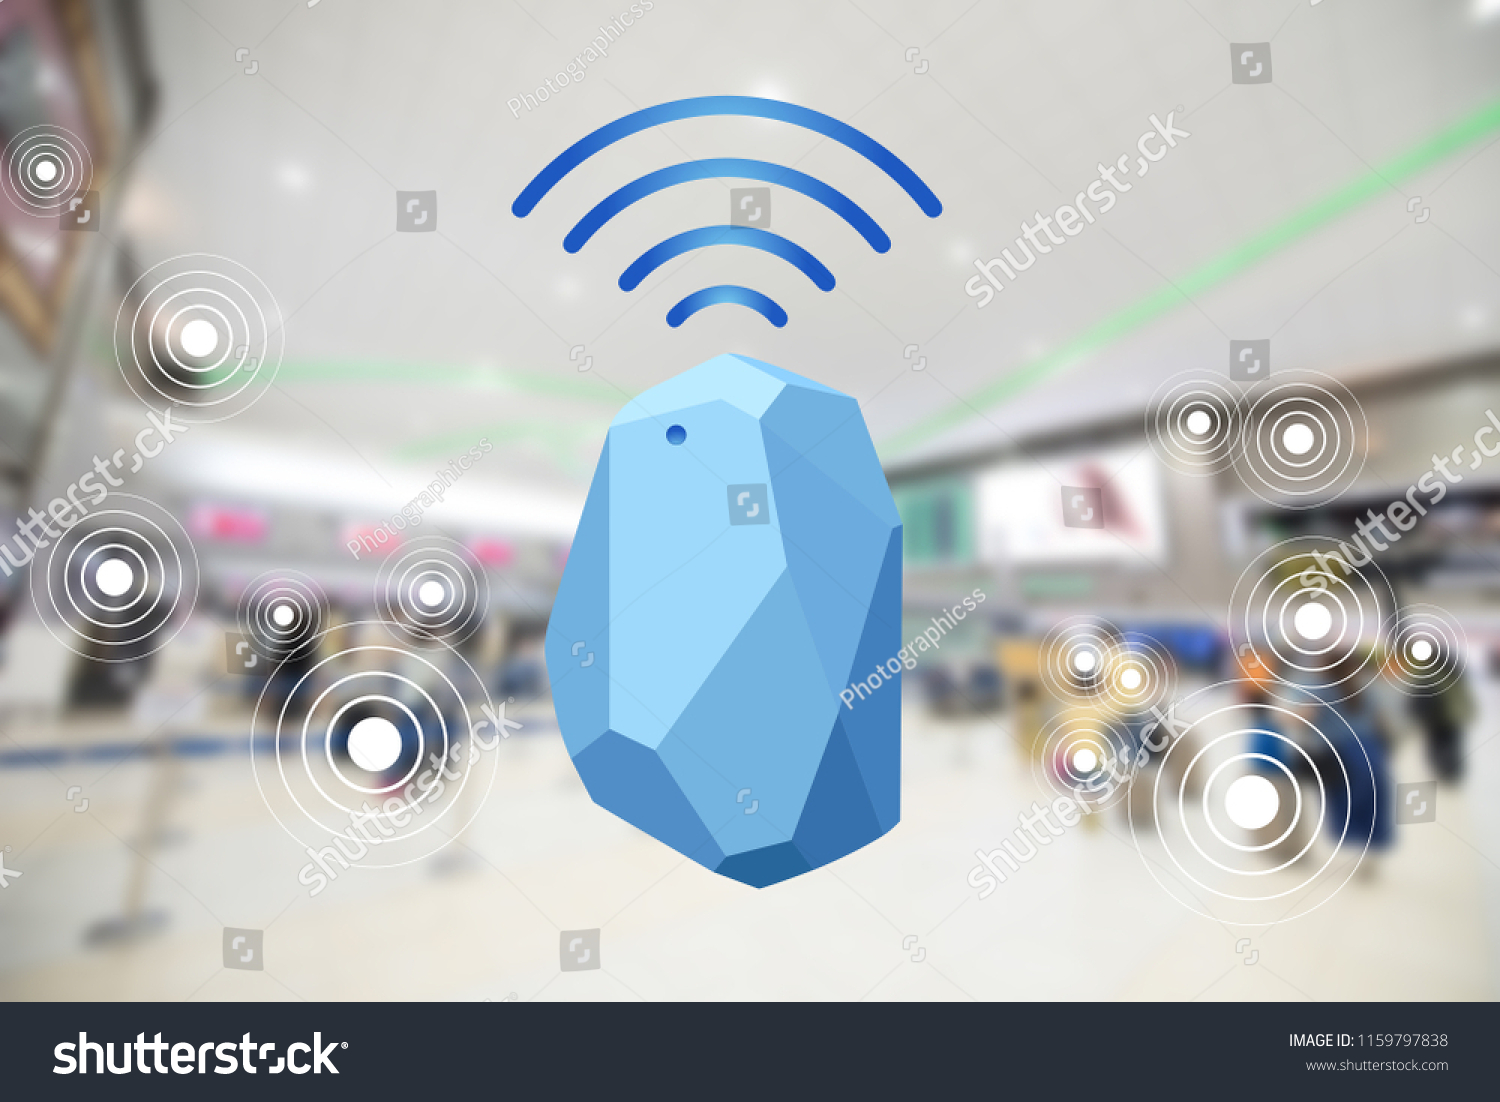 Beacon device home and office radar. Use for all situations. with network connect signal graphic and blur background at the airport  #1159797838